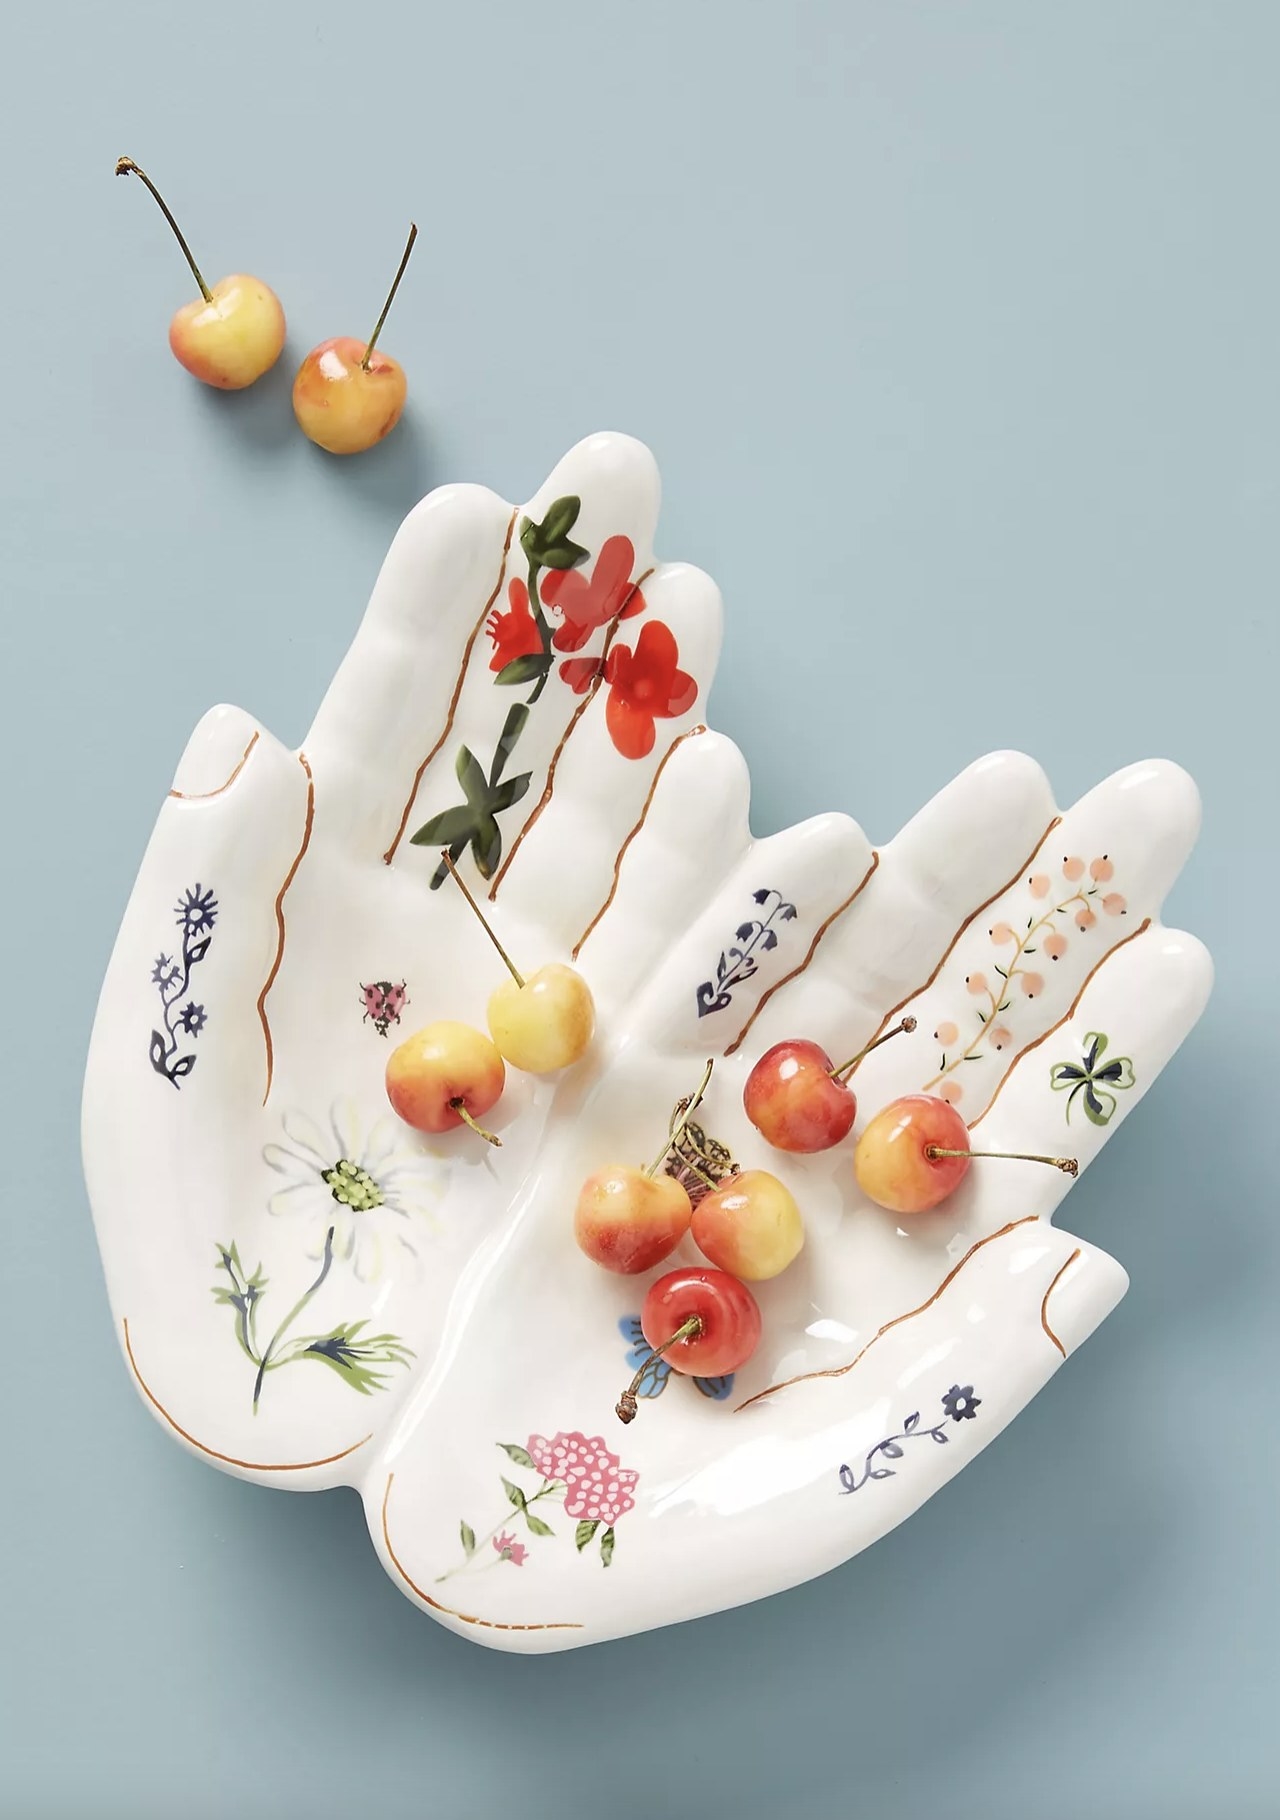 The hand-shaped serving platter